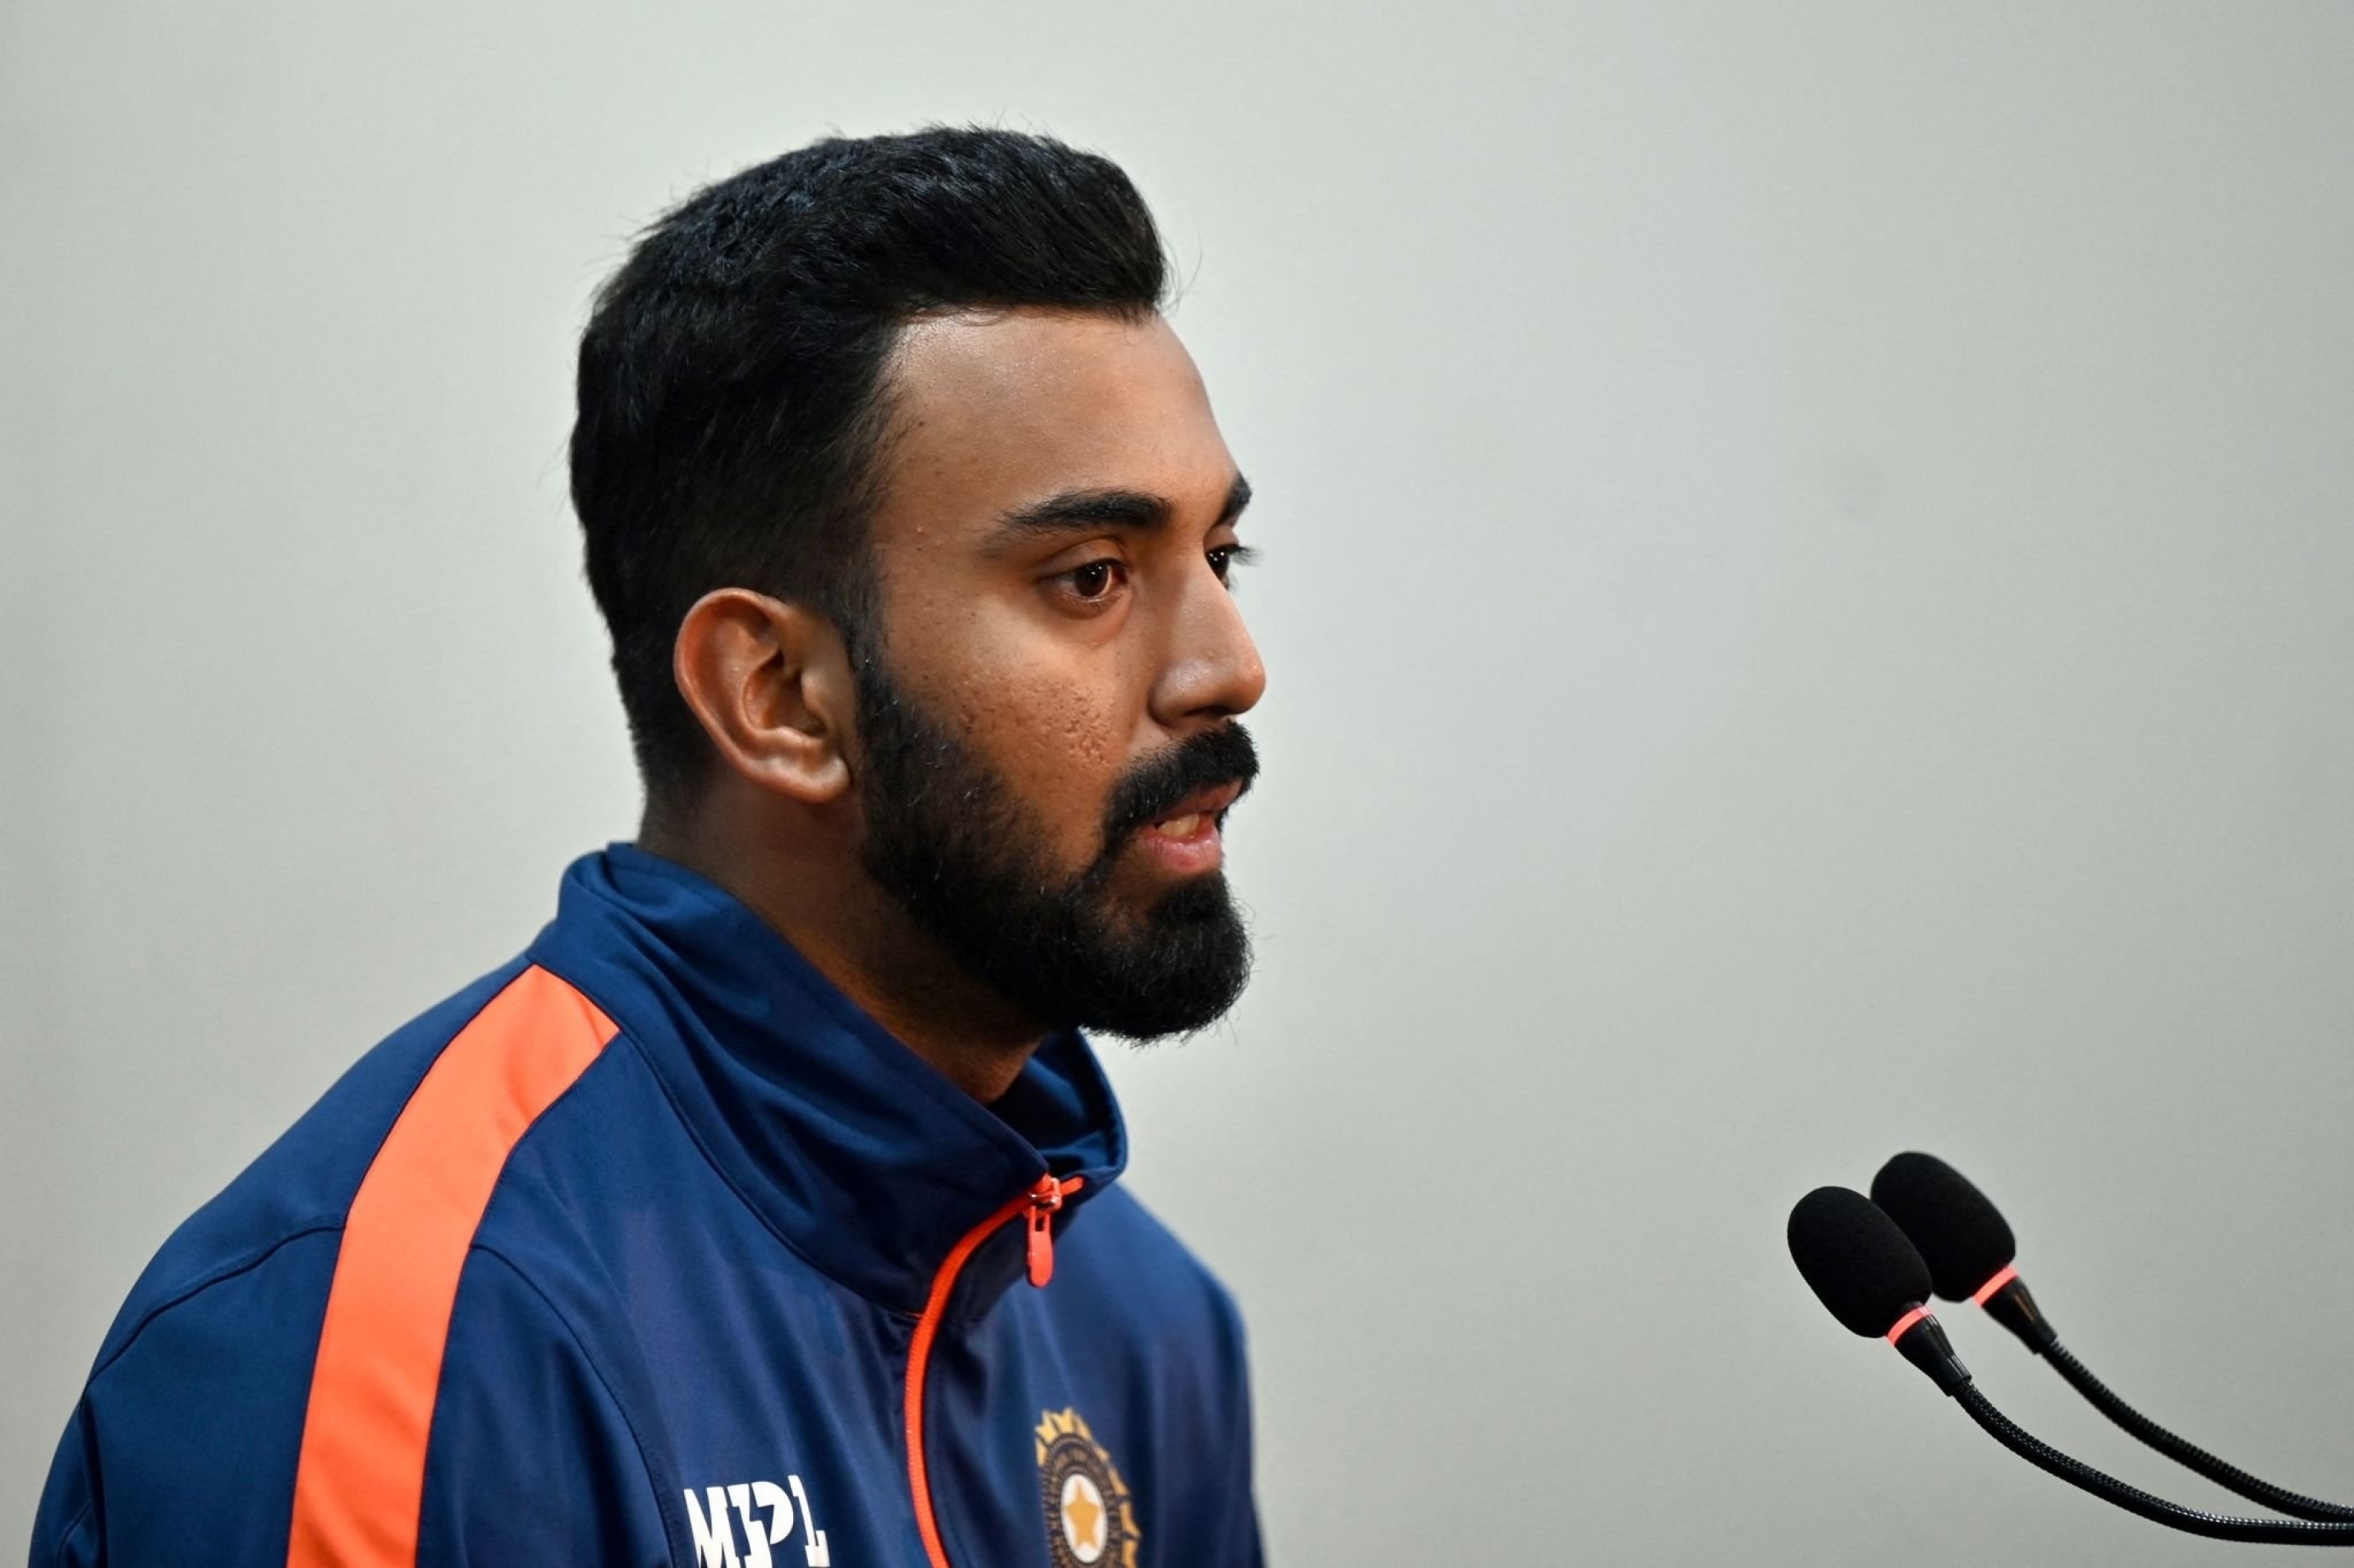 Team India Press Conference: India captain KL Rahul to address the media in  Dhaka ahead of 2nd Test - Follow LIVE